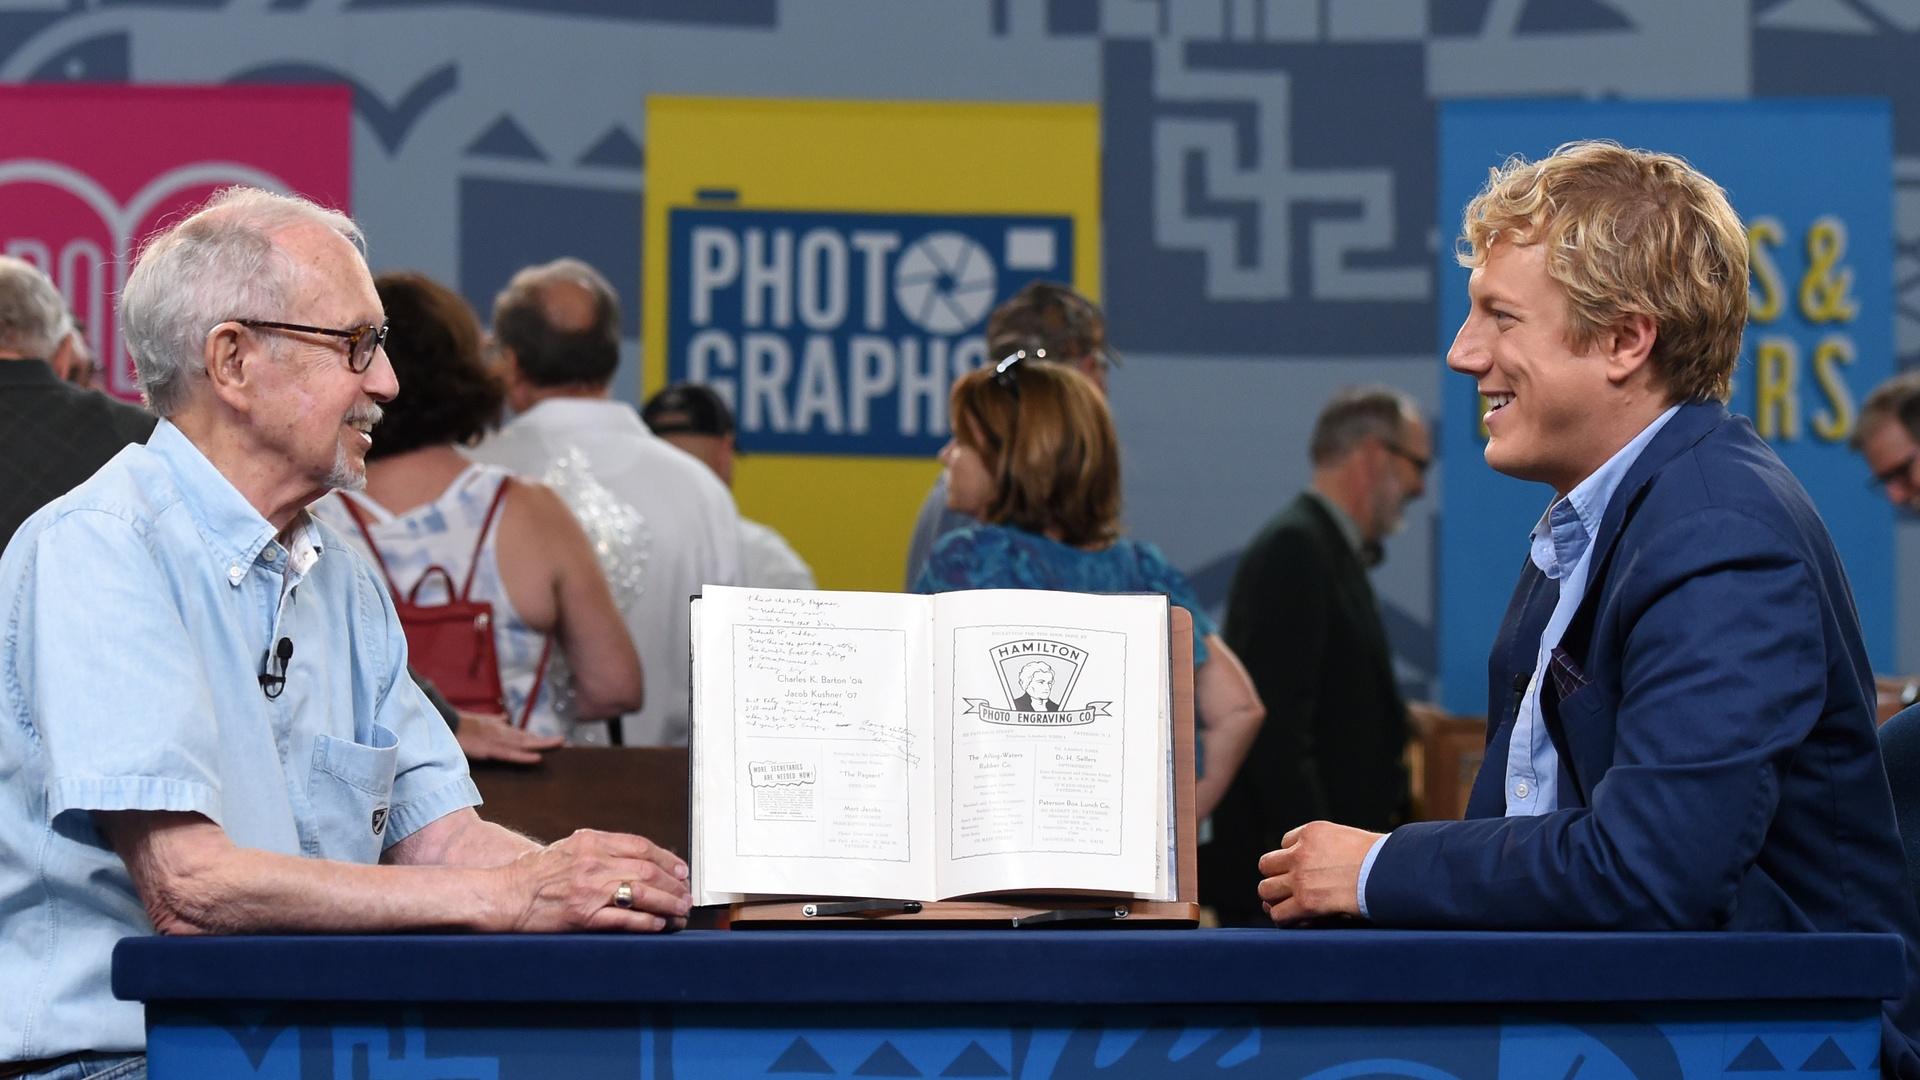 Antiques Roadshow 2020 Schedule To complete the information can